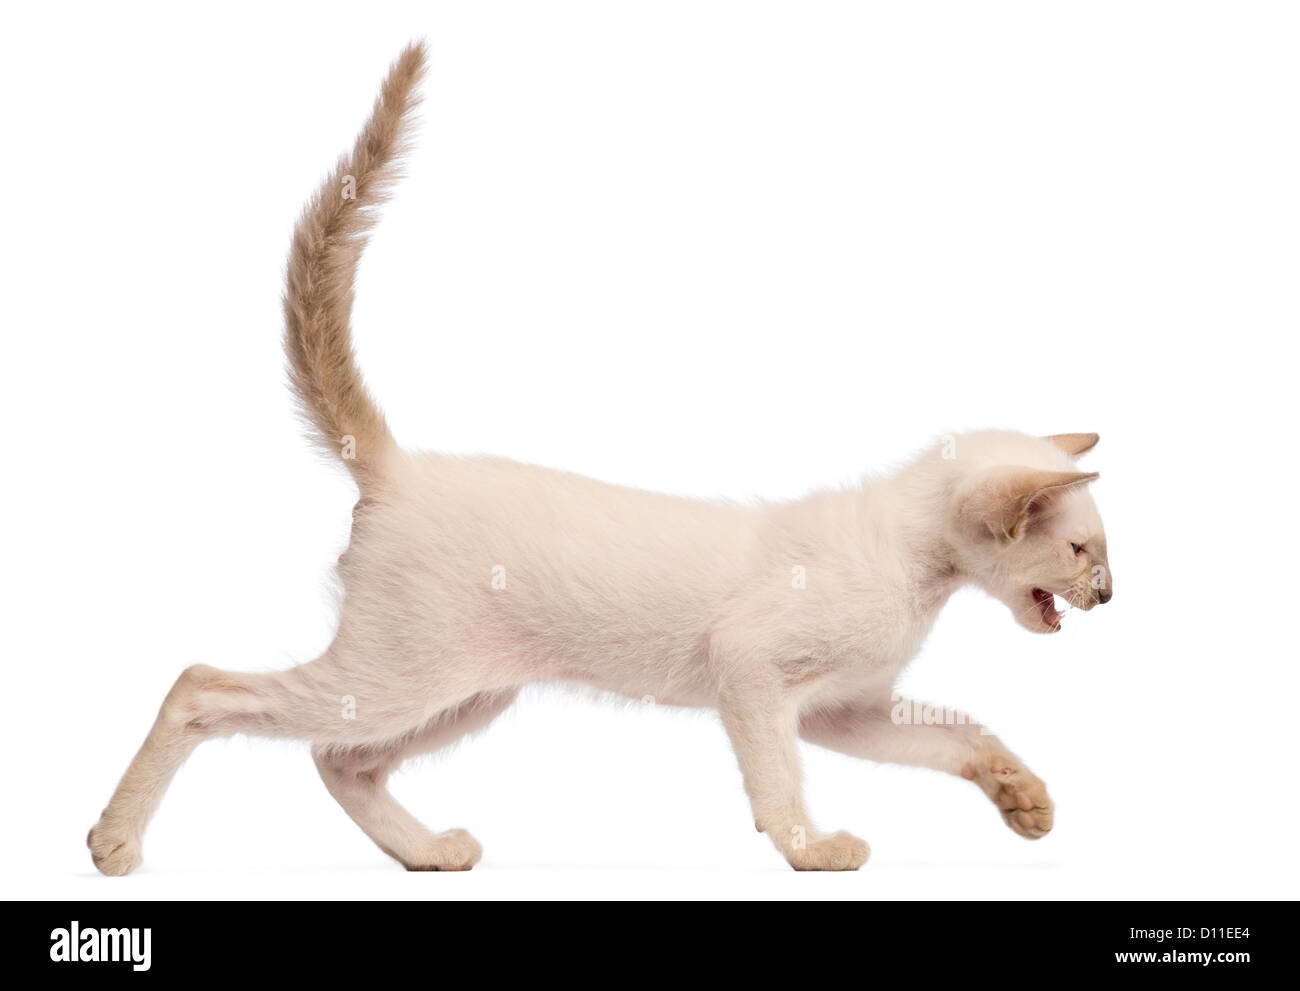 Oriental Shorthair kitten, 9 weeks old, running and meowing against white background Stock Photo